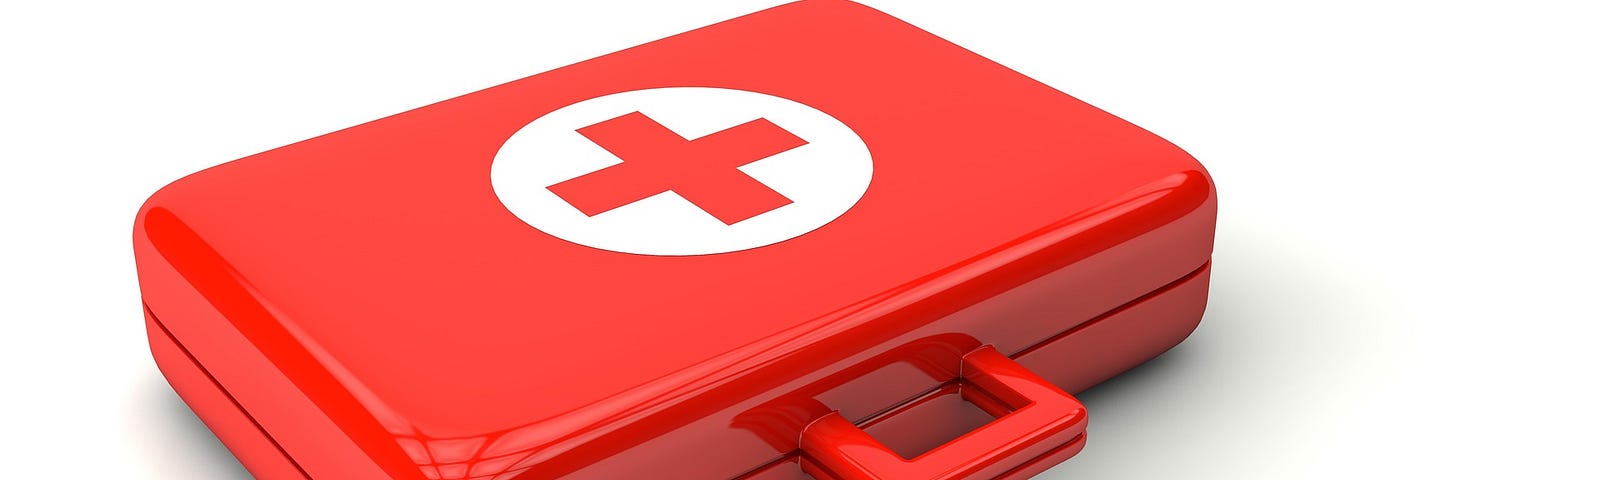 First aid kit in red briefcase